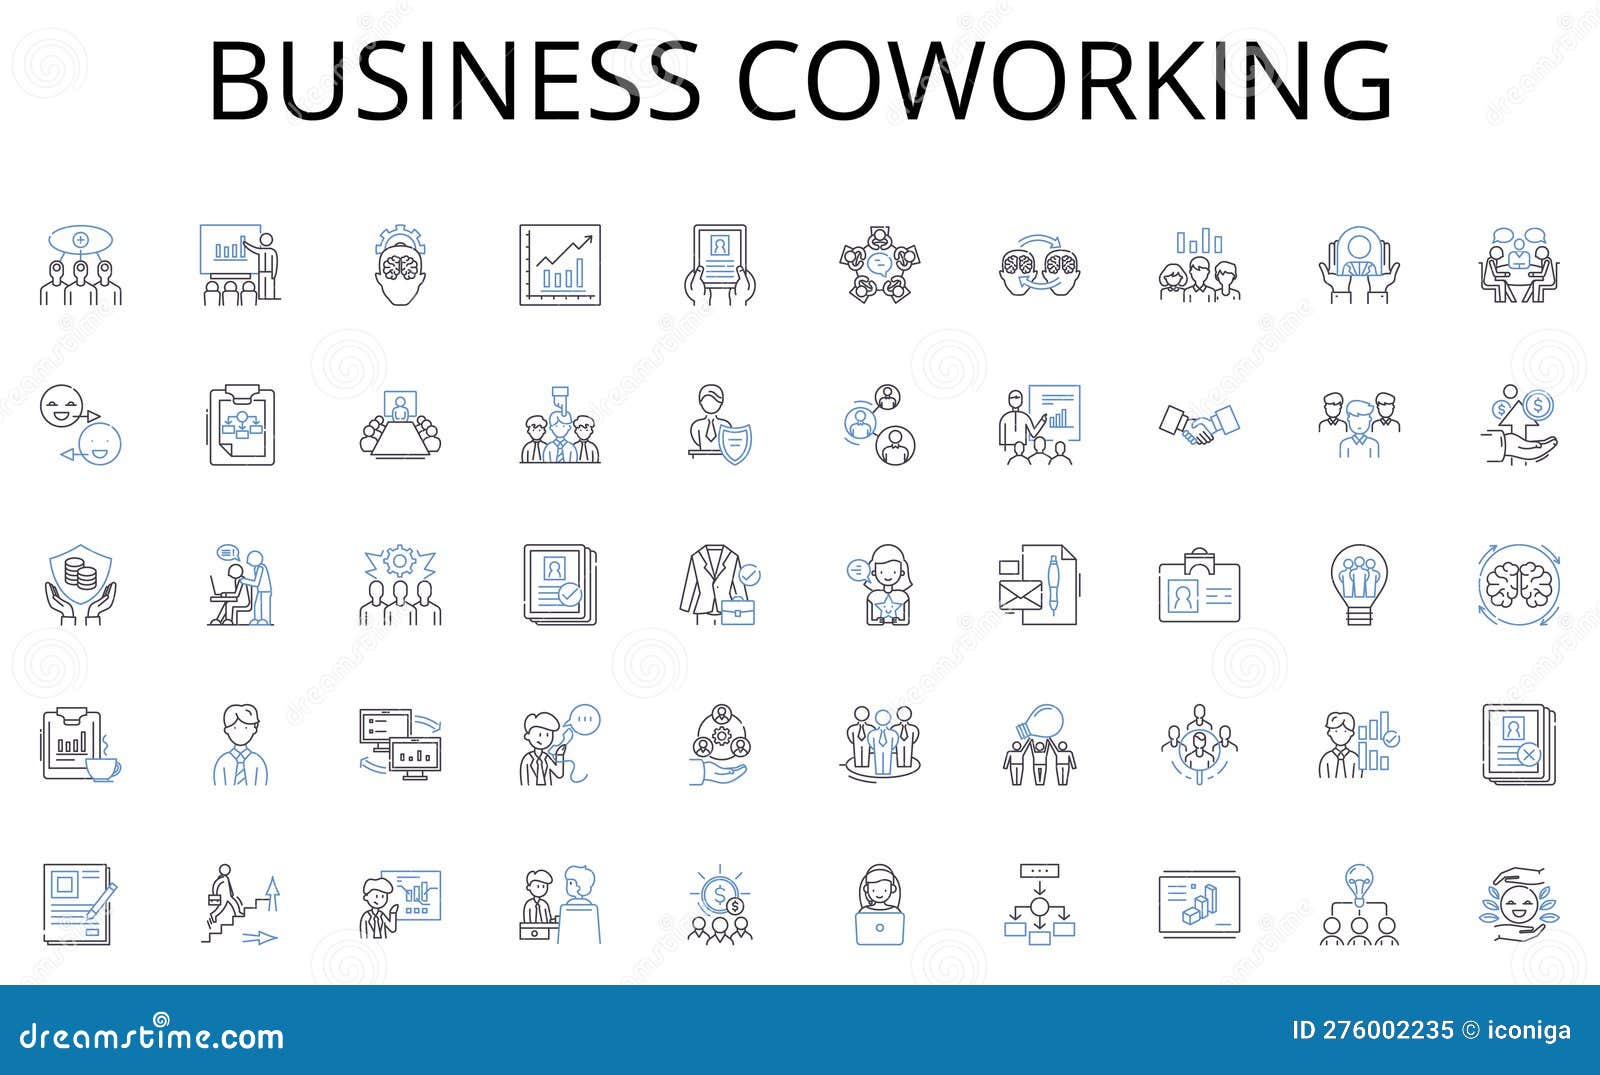 business coworking line icons collection. expressiveness, articulation, eloquence, clarity, precision, fluency